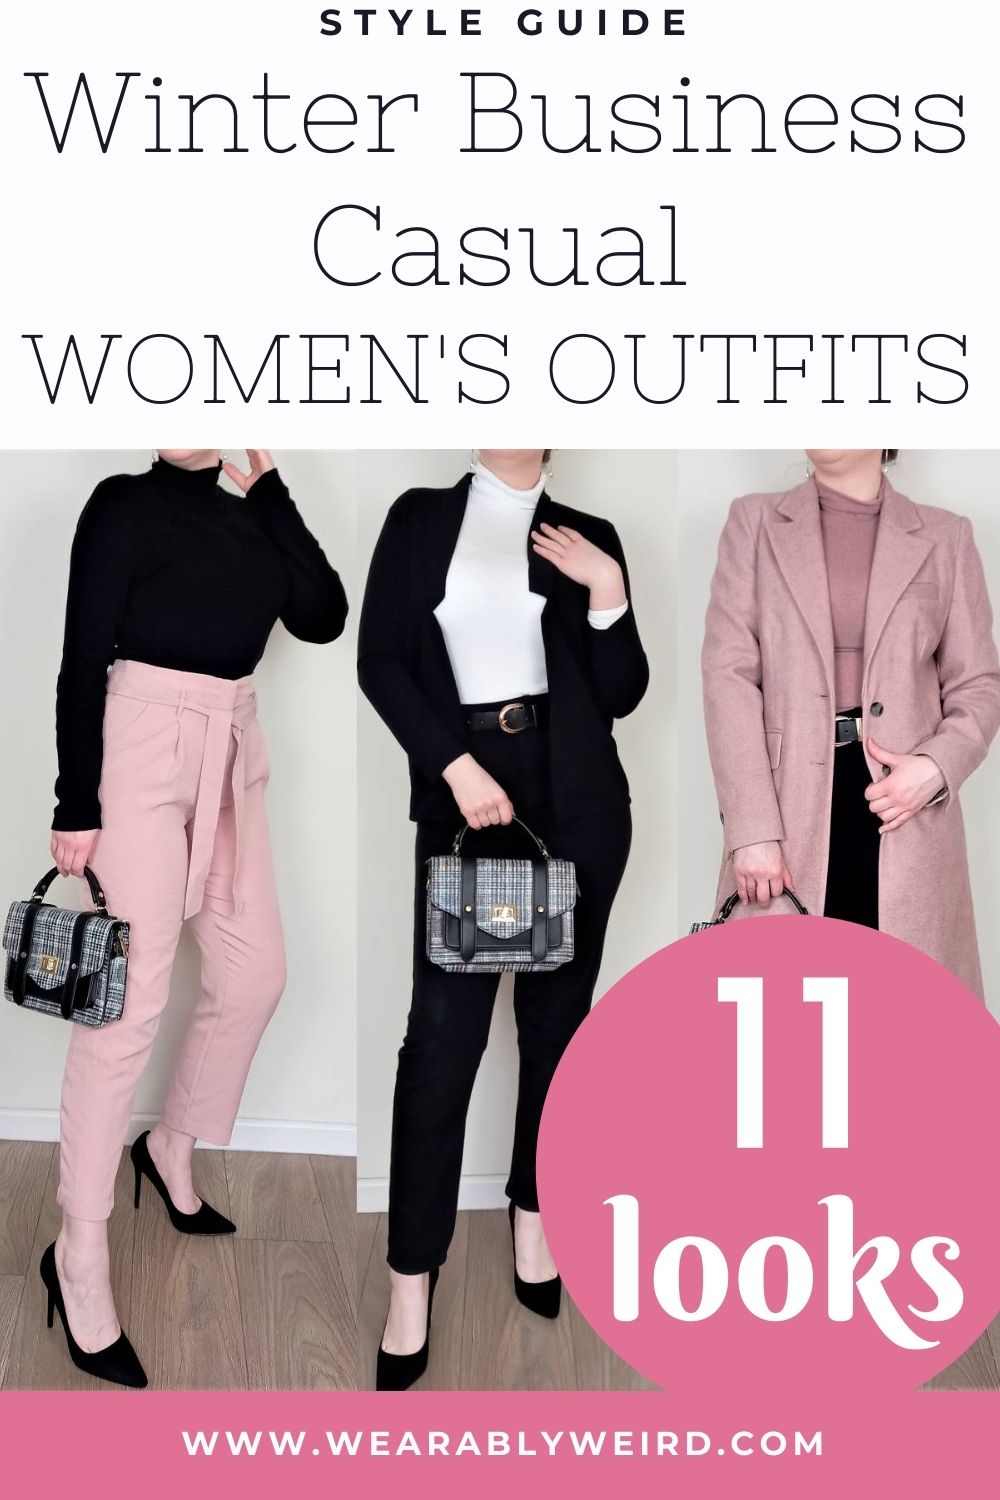 Winter business casual women's outfits pin